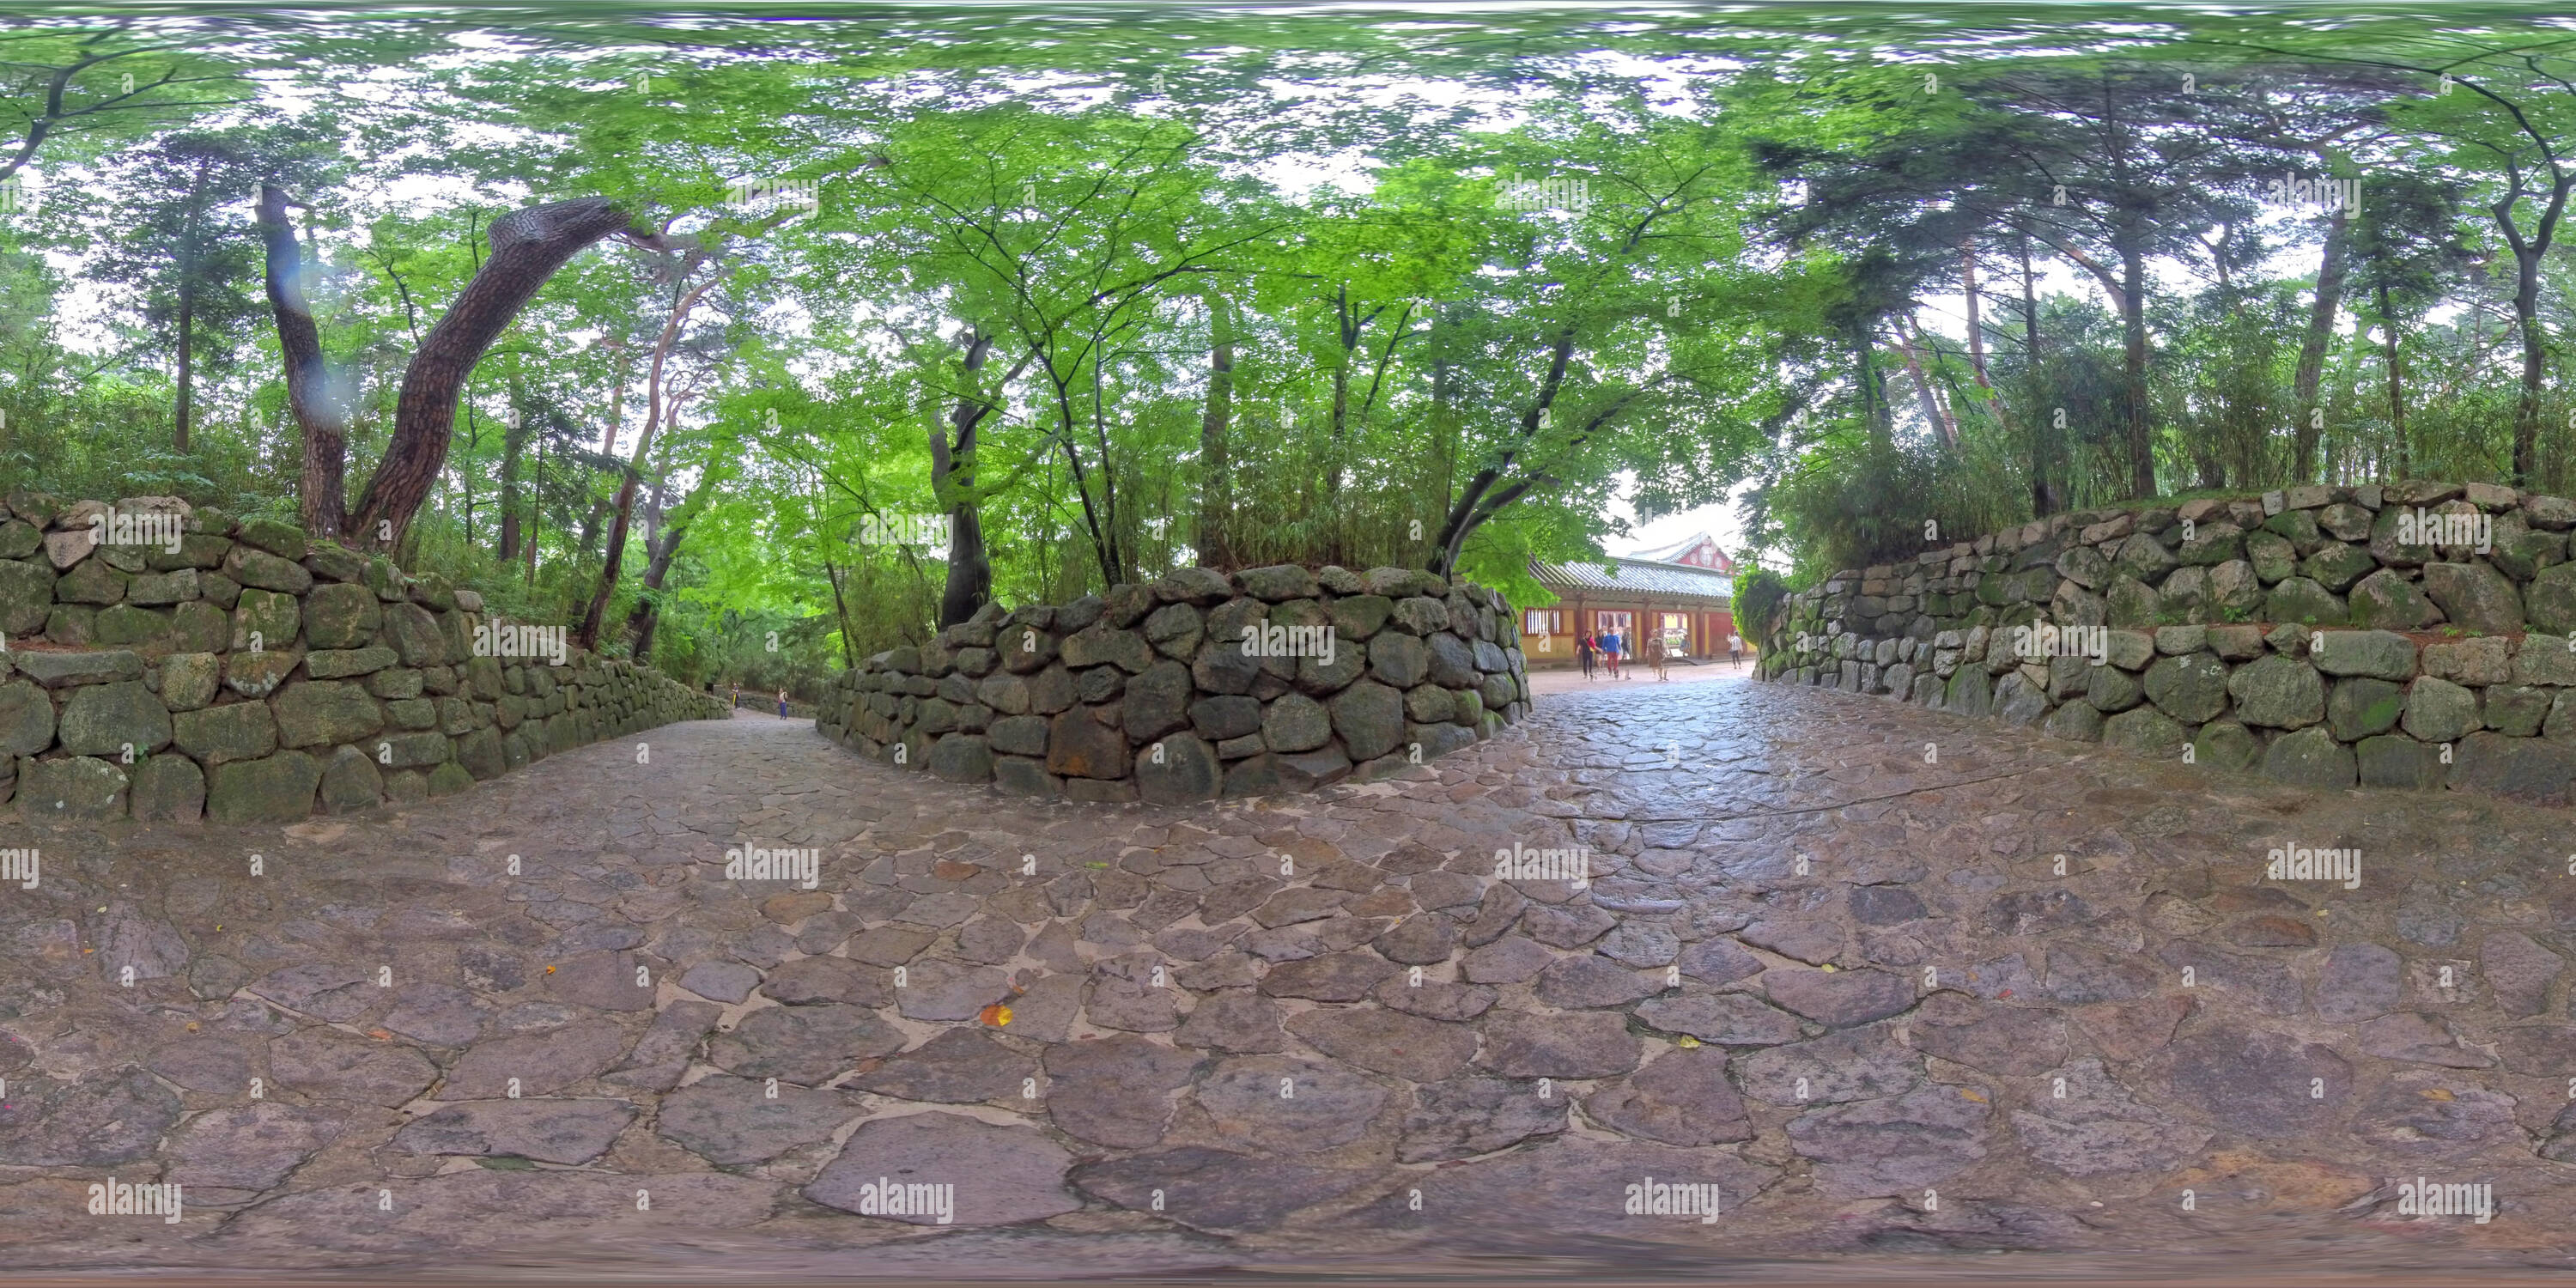 360 degree panoramic view of Gyeongju, South Korea 27 August 2019: 360VR World Heritage Site Bulguksa Temple. Bulguksa Temple is a representative relic of Buddhist culture from th